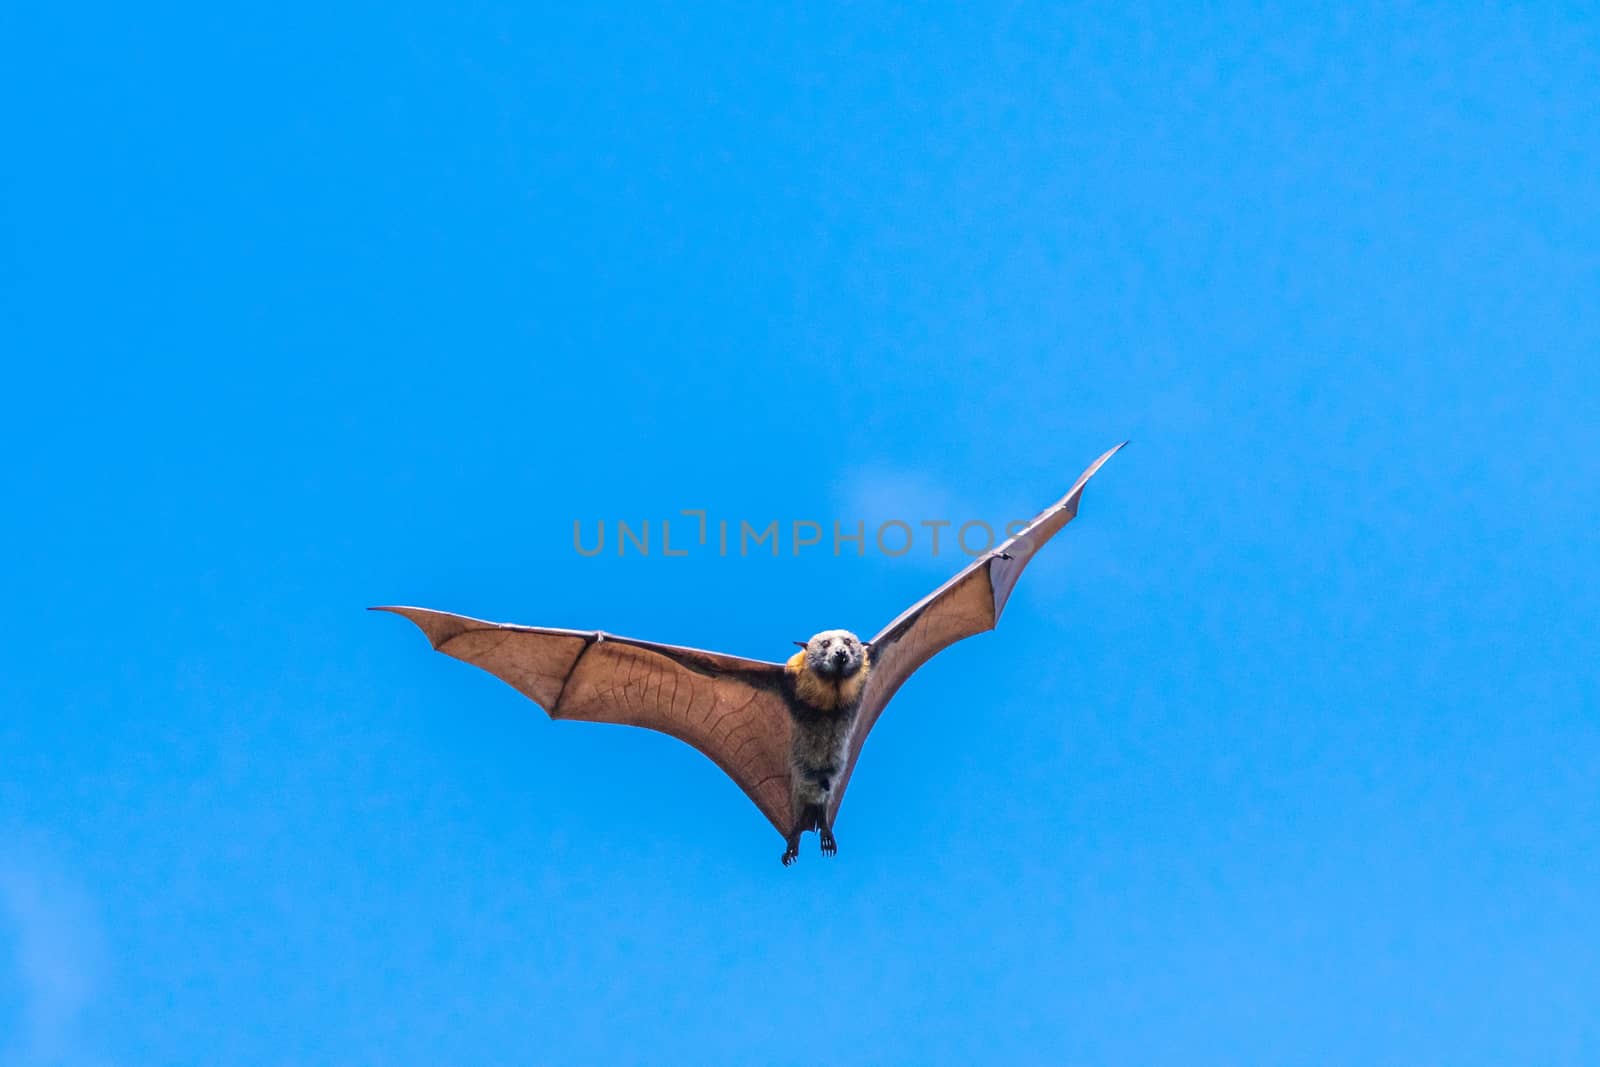 Isolated fruit bat, flying fox, on a blue sky background by mauricallari